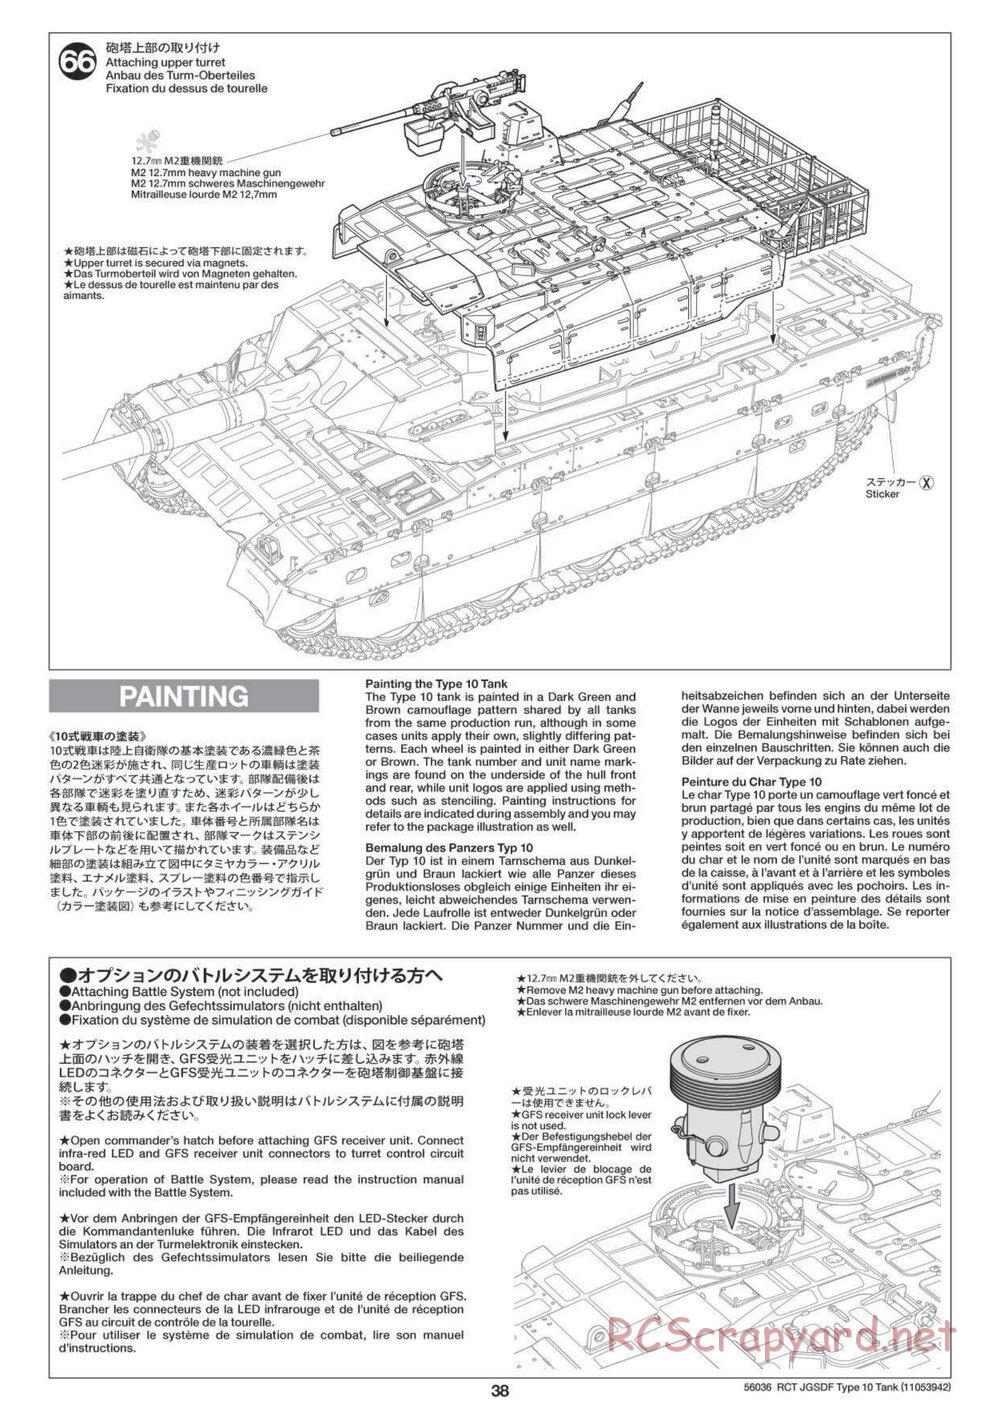 Tamiya - JGSDF Type 10 Tank - 1/16 Scale Chassis - Manual - Page 38